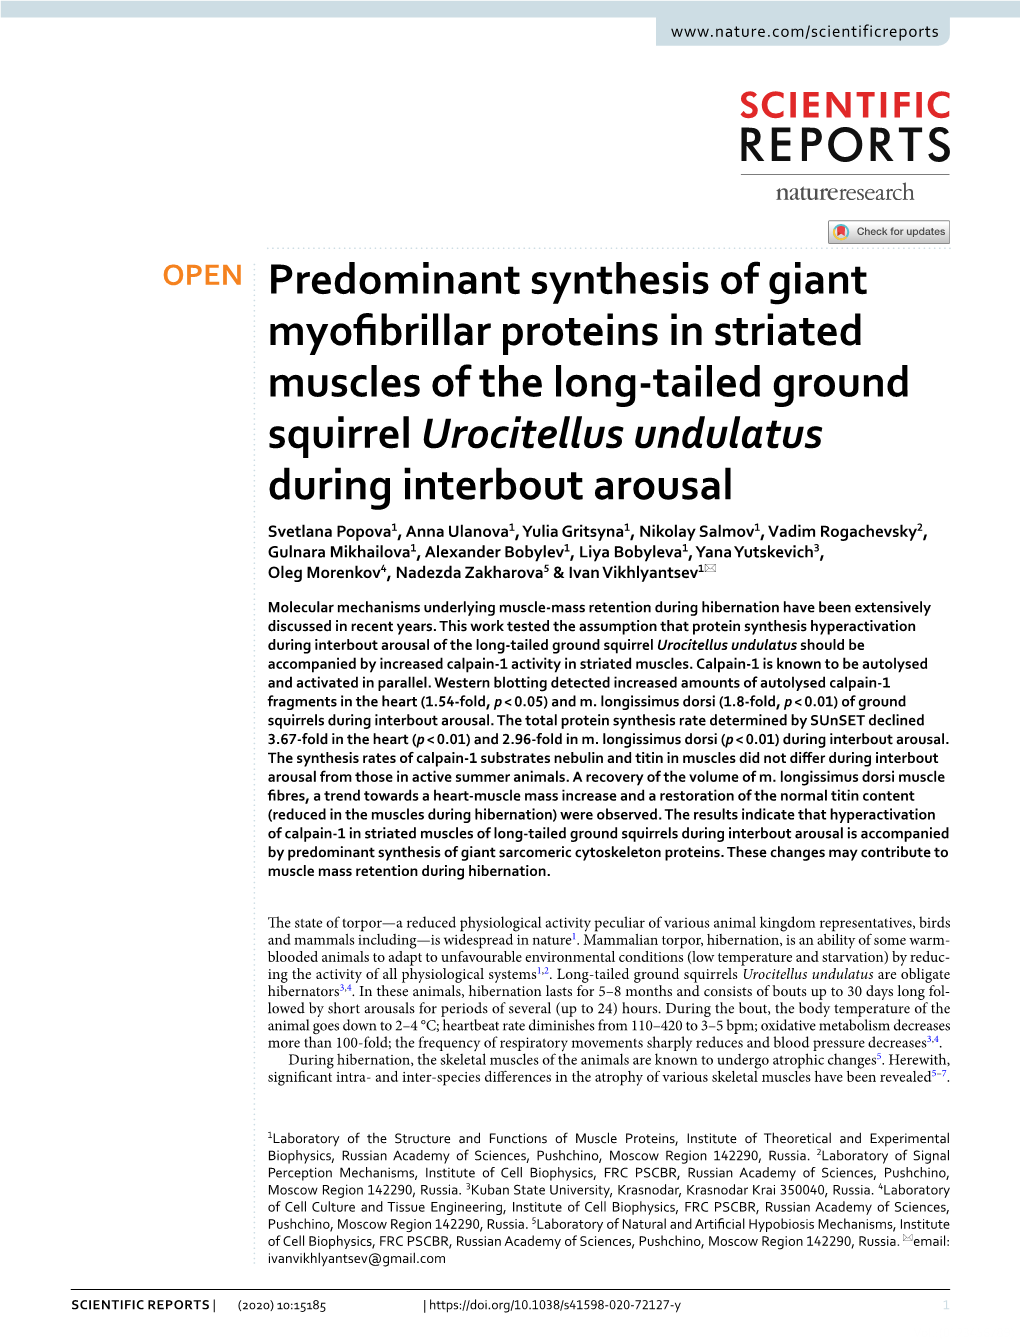 Predominant Synthesis of Giant Myofibrillar Proteins in Striated